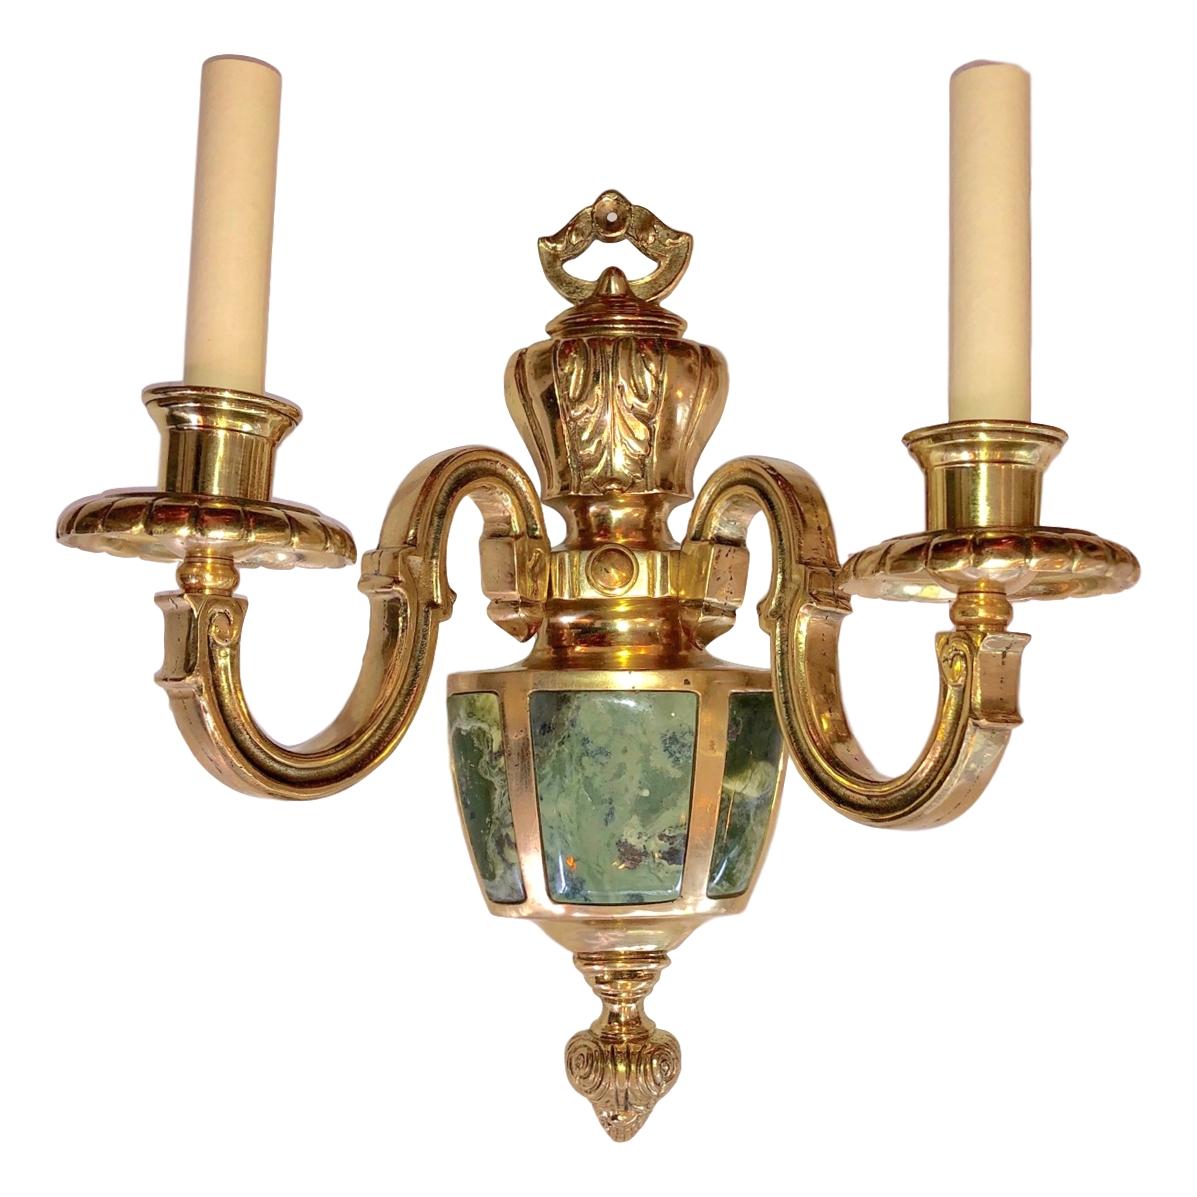 A set of four circa 1930s French bronze and stone two-arm sconces with Jadeite stone insets. Sold per pair.

Measurements:
Height: 14